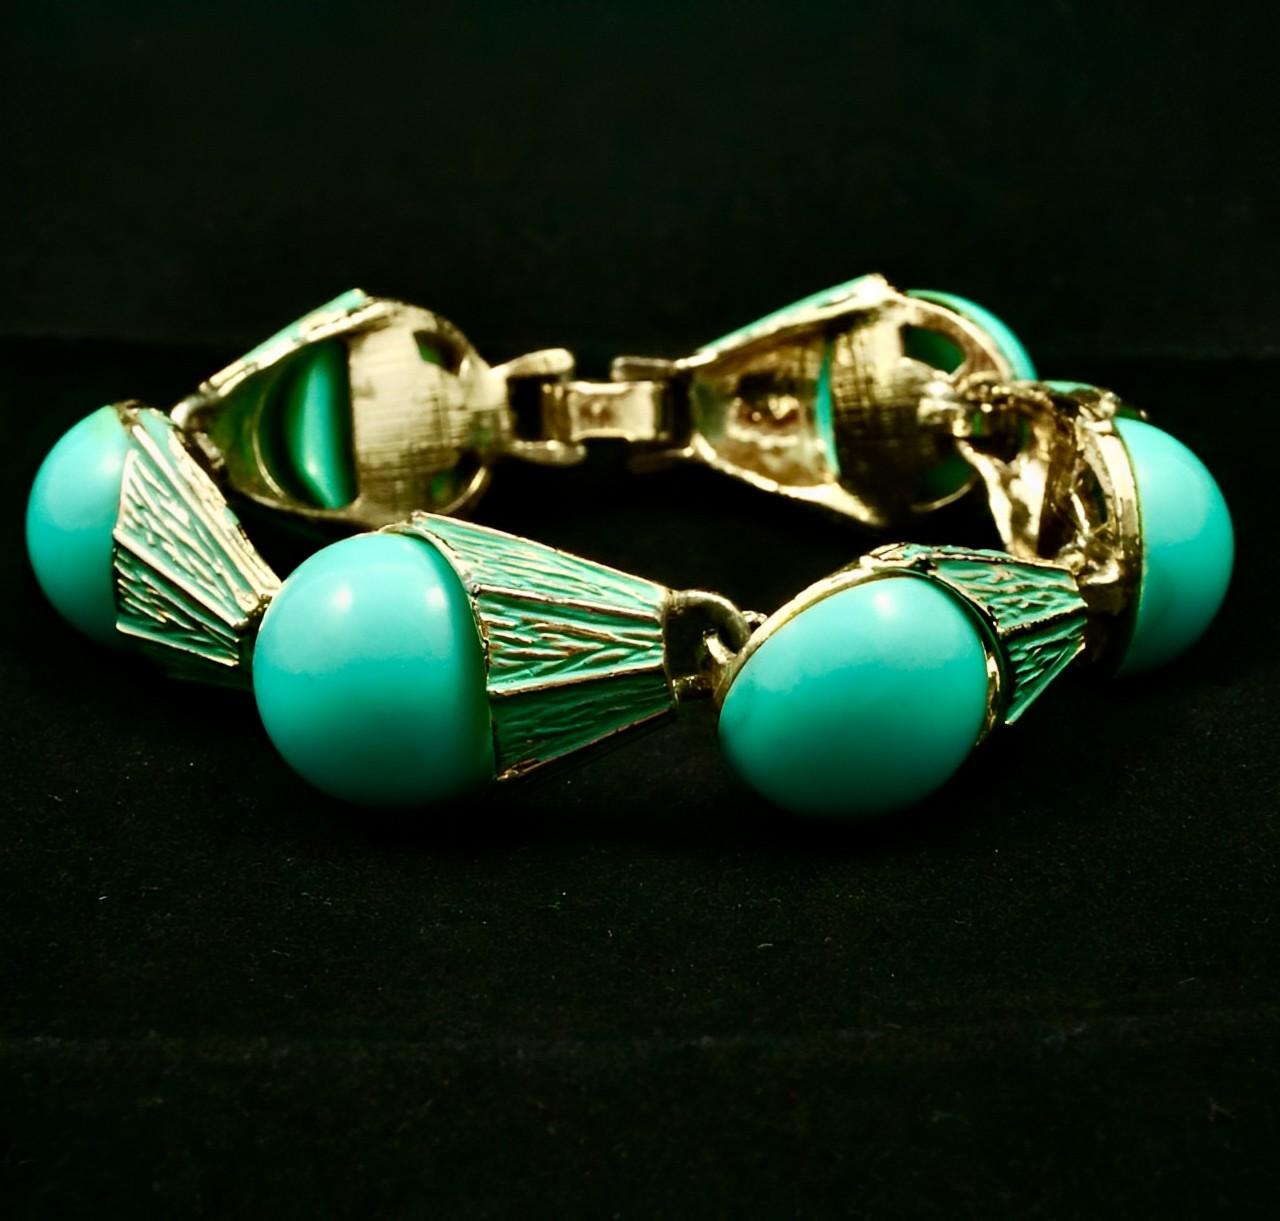 Pale Gold Tone Bracelet with Turquoise Enamel and Lucite Links circa 1960s For Sale 2